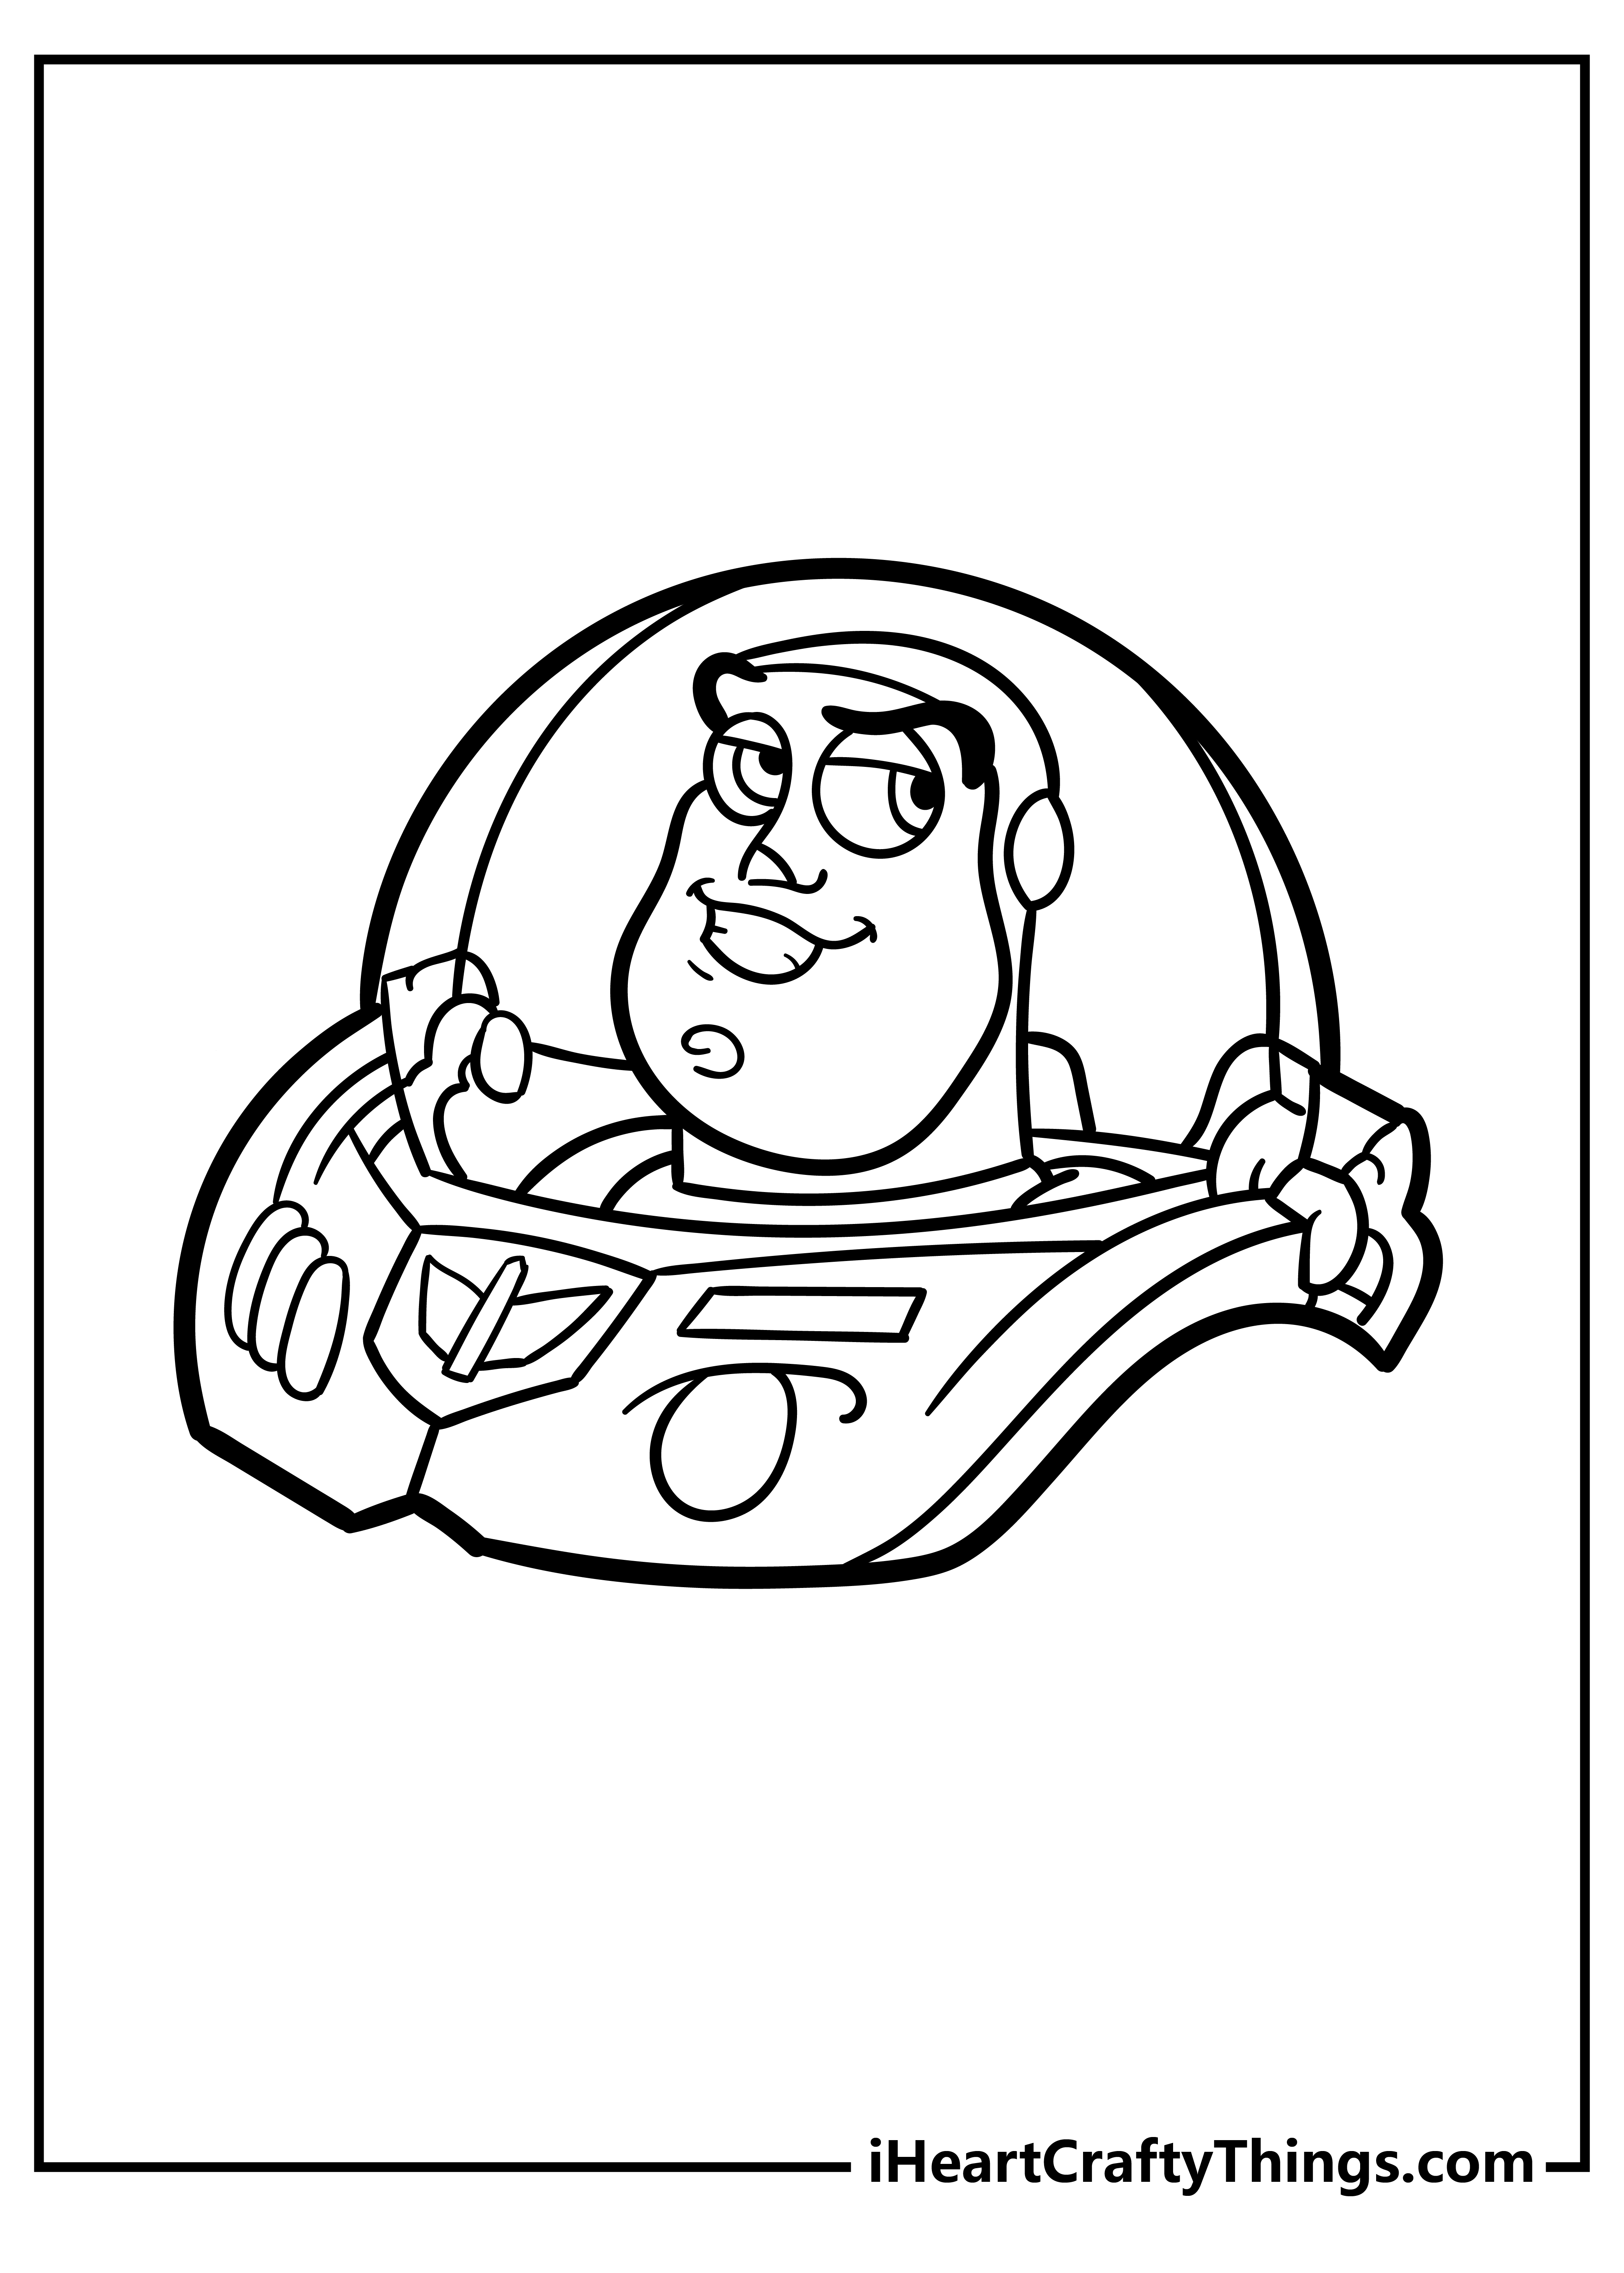 Printable Buzz Lightyear Cartoon Coloring Pages (Updated 2022)